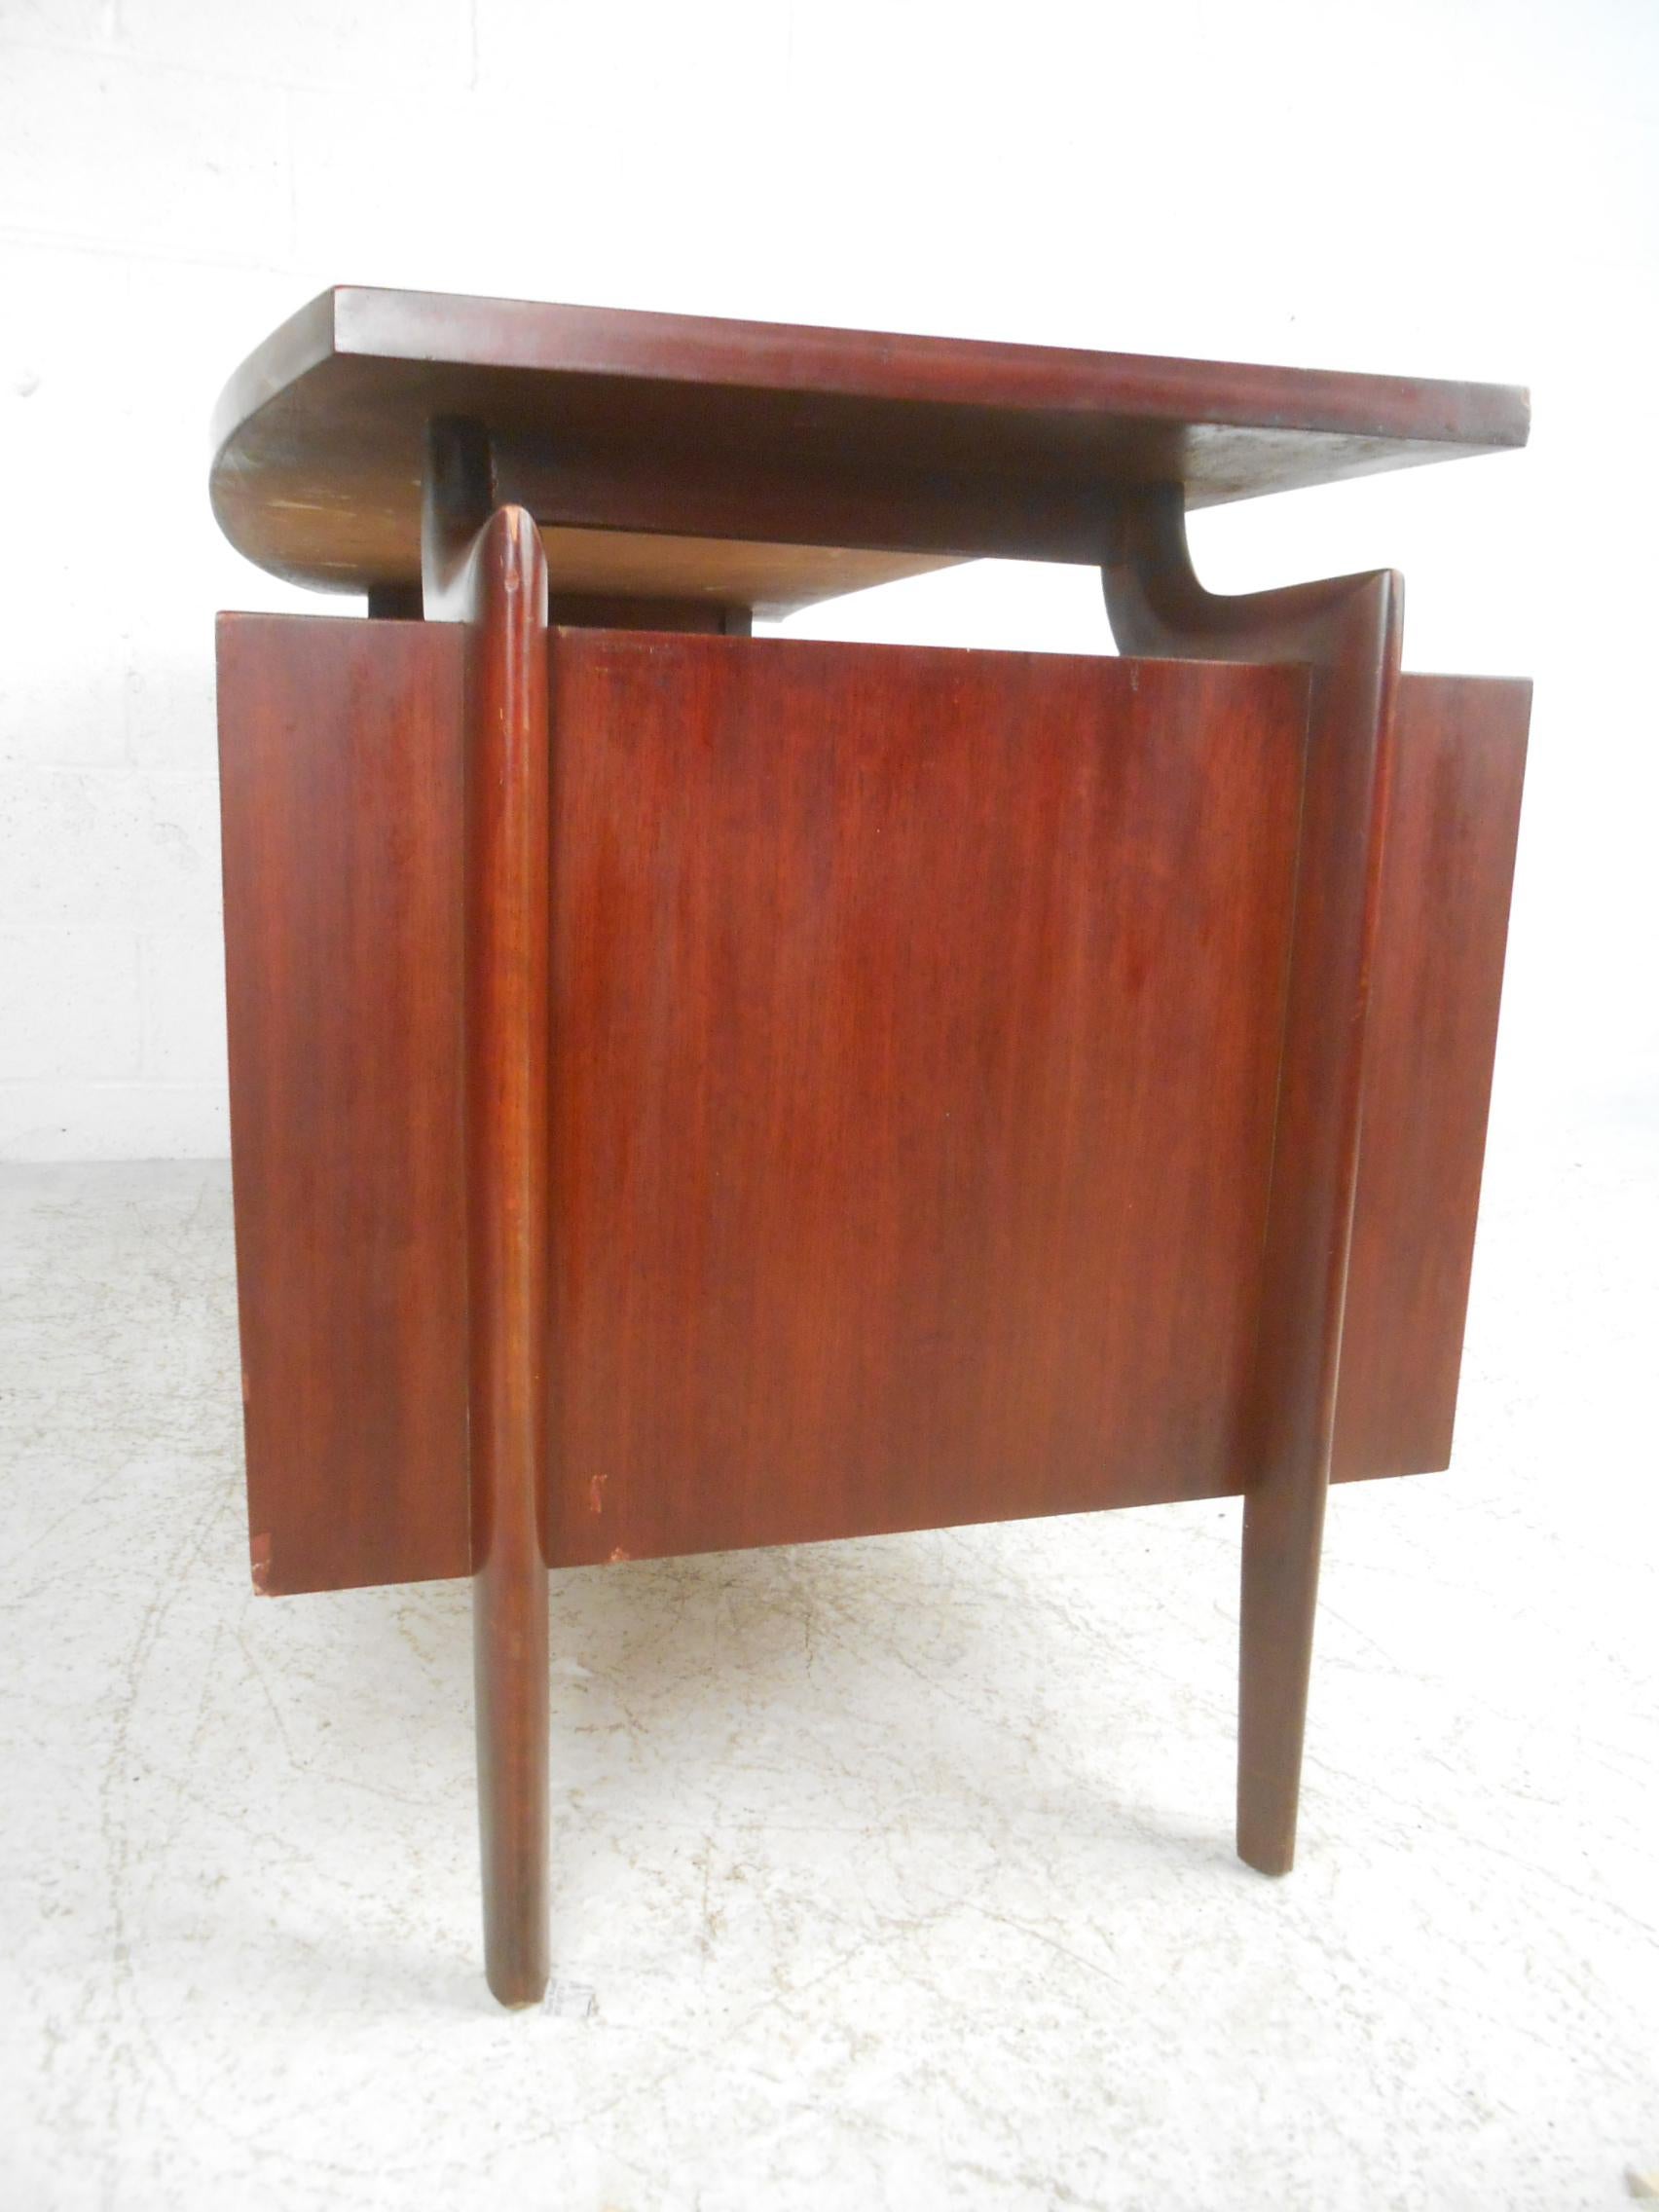 Mid-Century Modern desk by Tri Bond Furniture, with floating top and finished back.
Please confirm location NY or NJ.